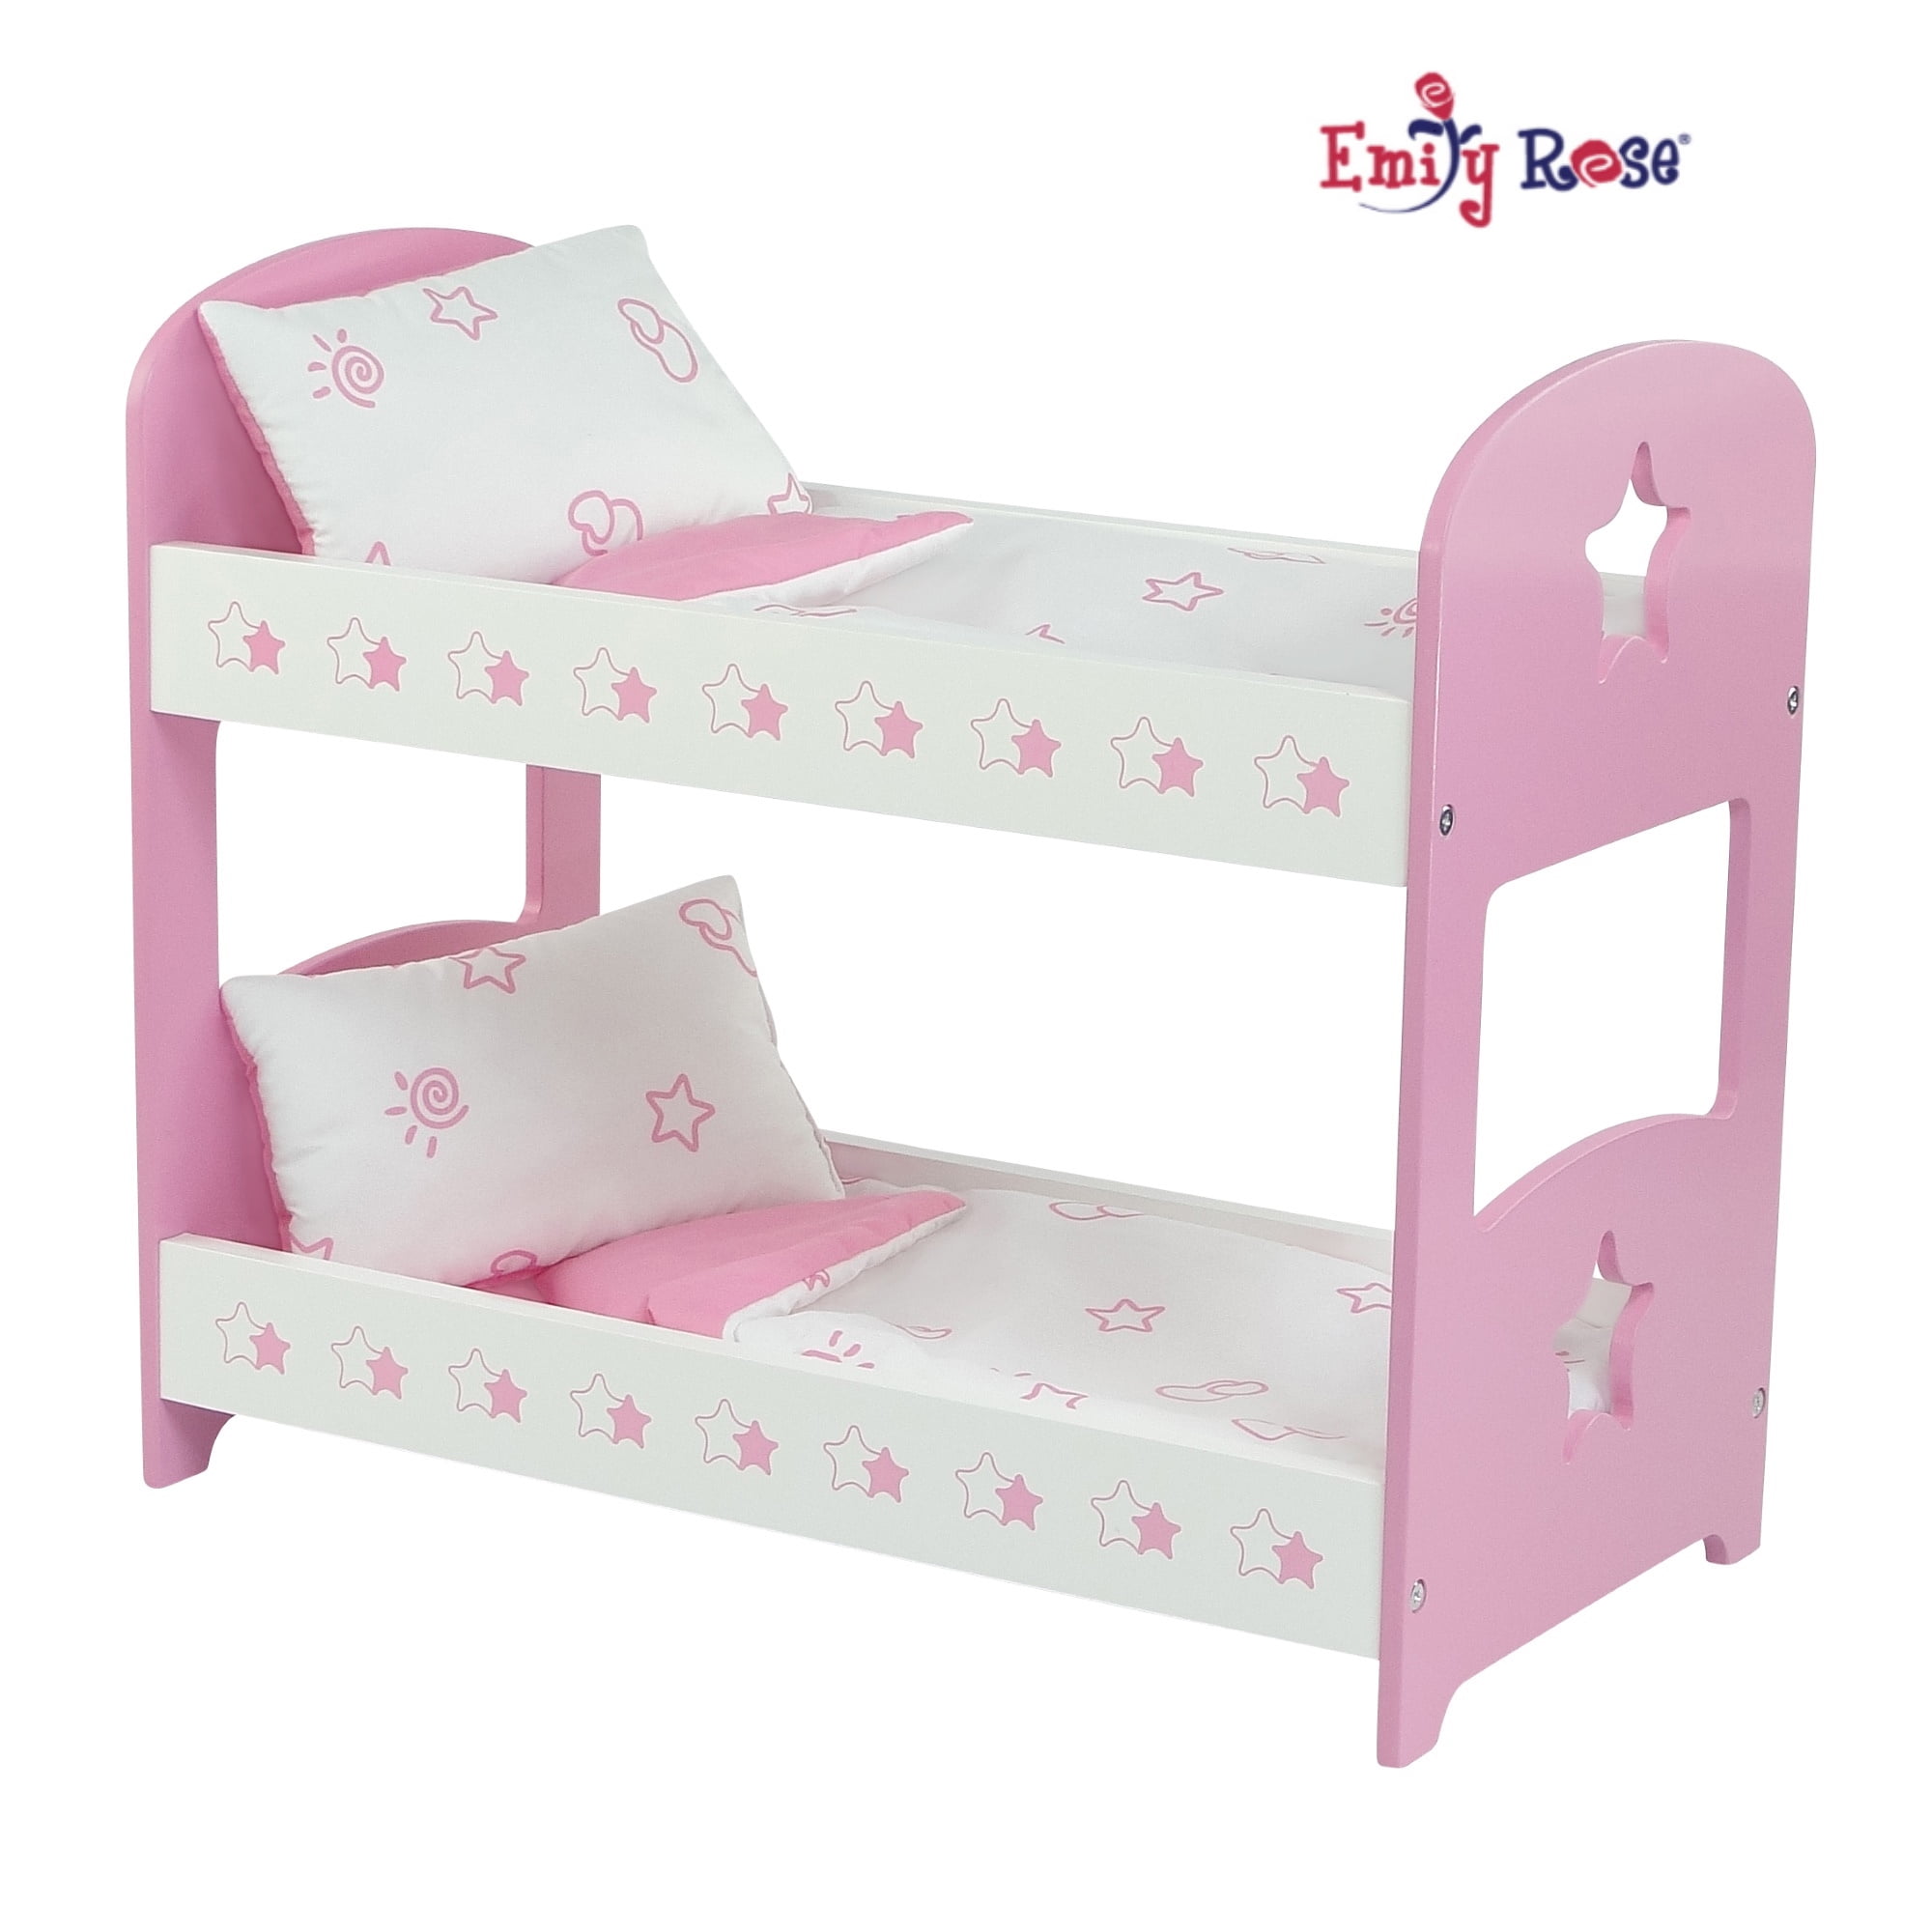 18 Inch Doll Bunk Bed Furniture, American Girl Doll Bunk Bed Bedding